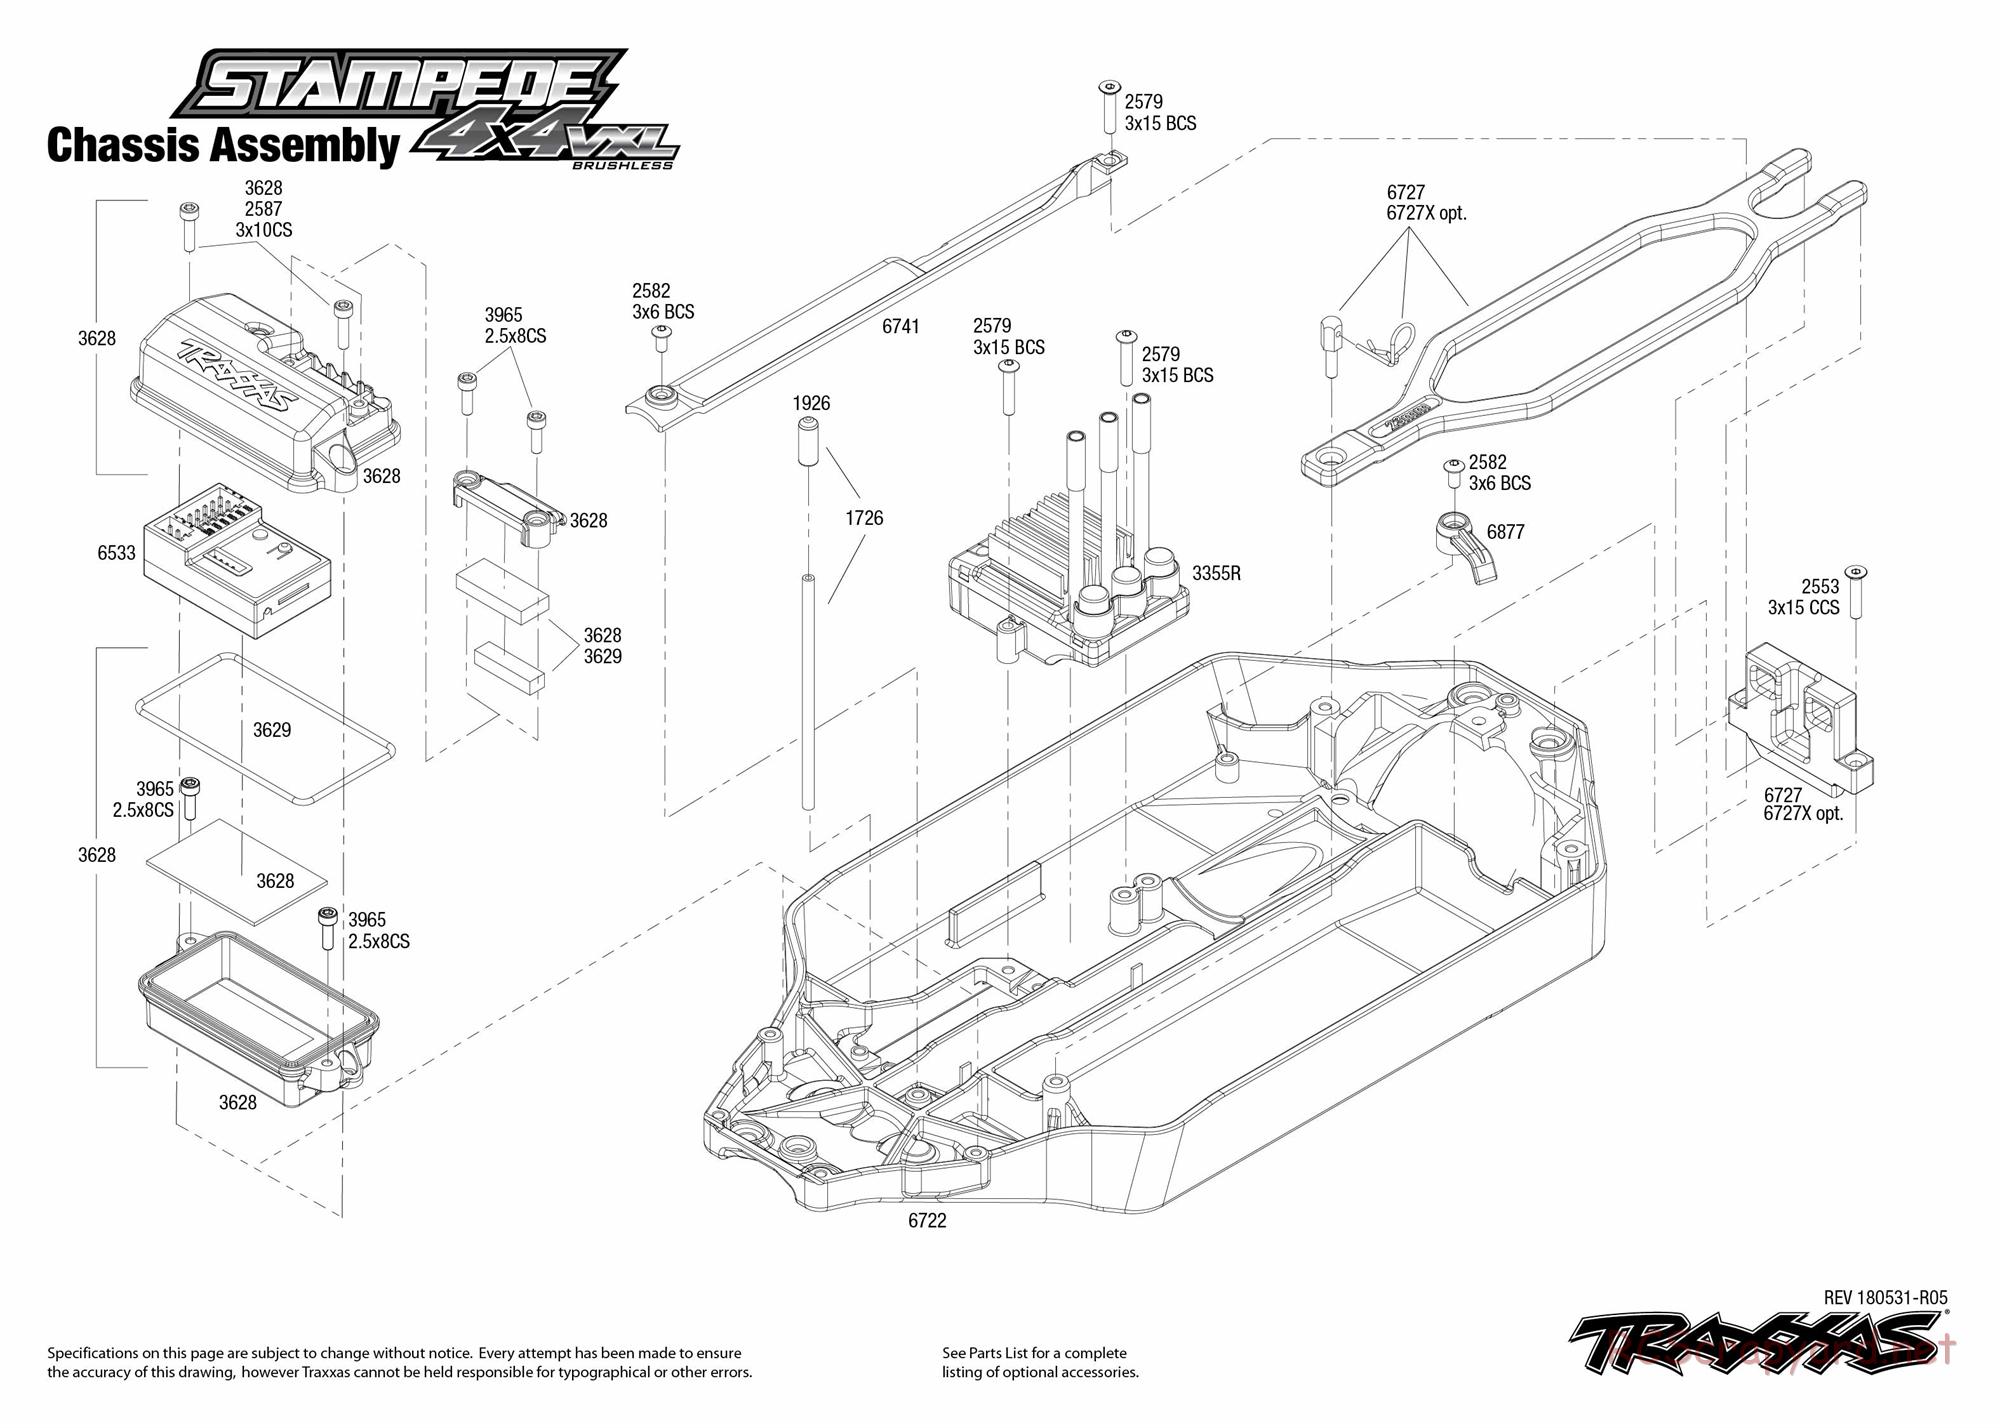 Traxxas - Stampede 4x4 VXL TSM (2015) - Exploded Views - Page 1